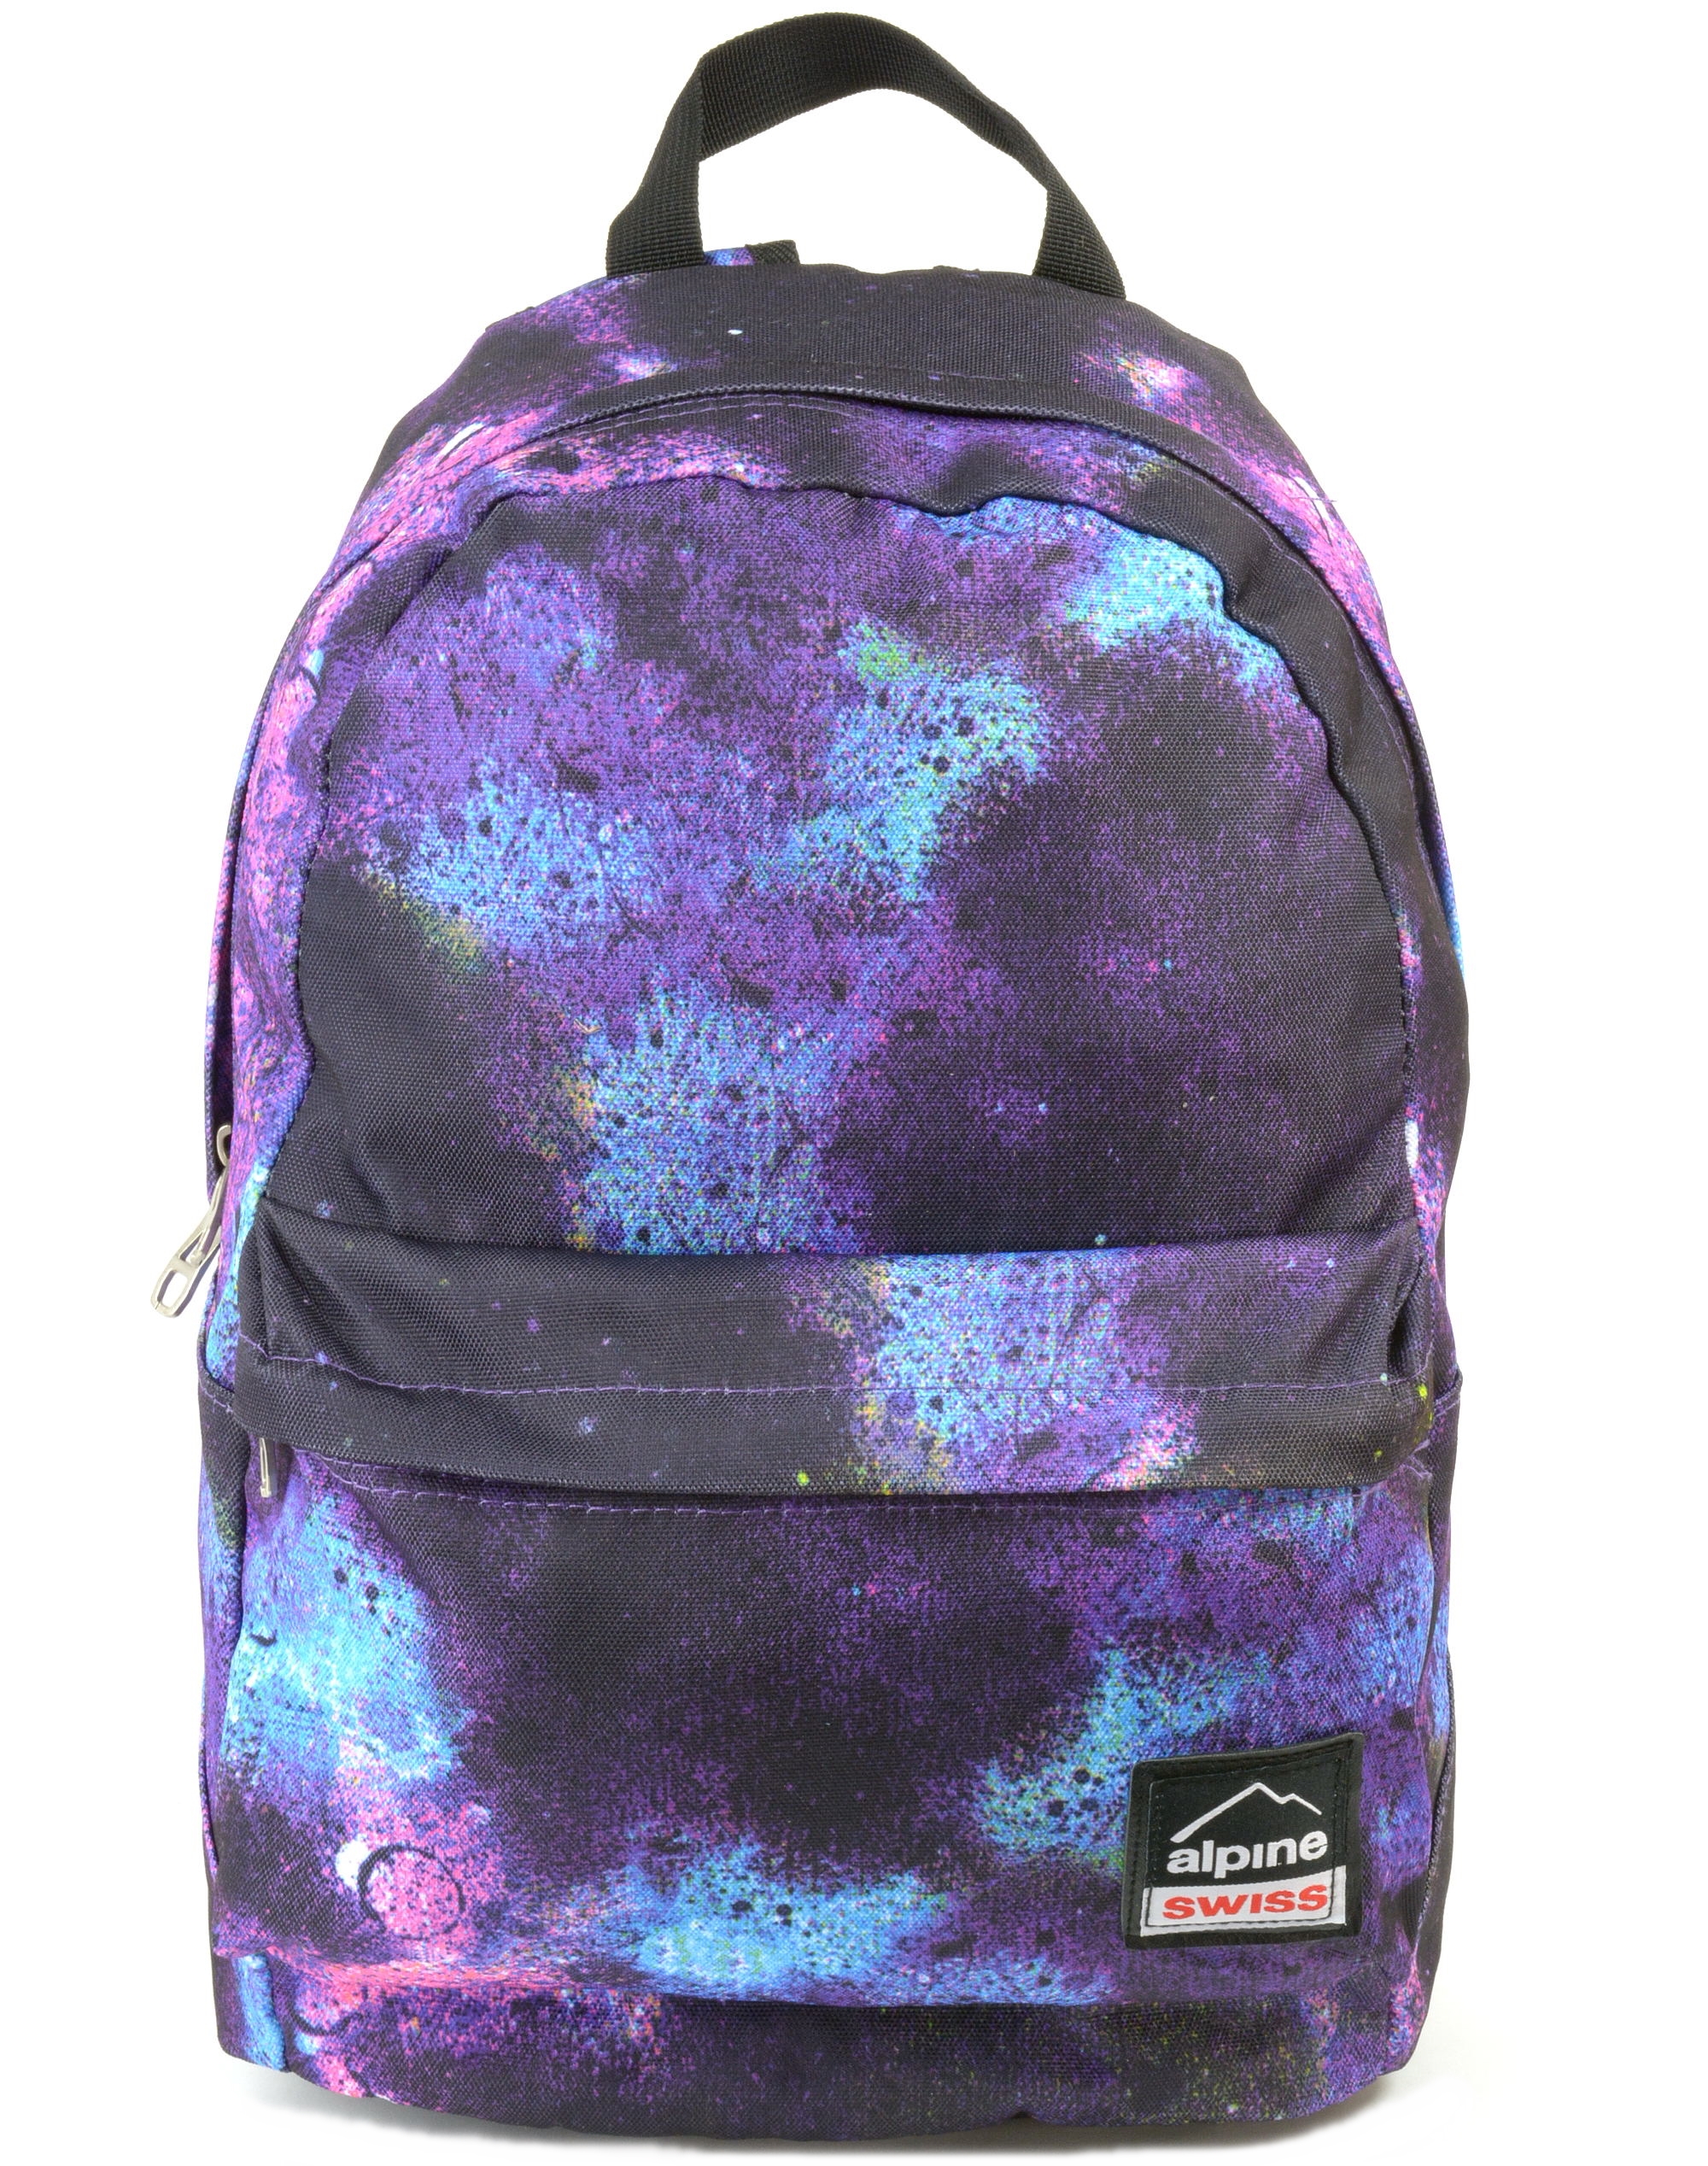 Alpine Swiss Midterm Backpack Only $13.99 Shipped!